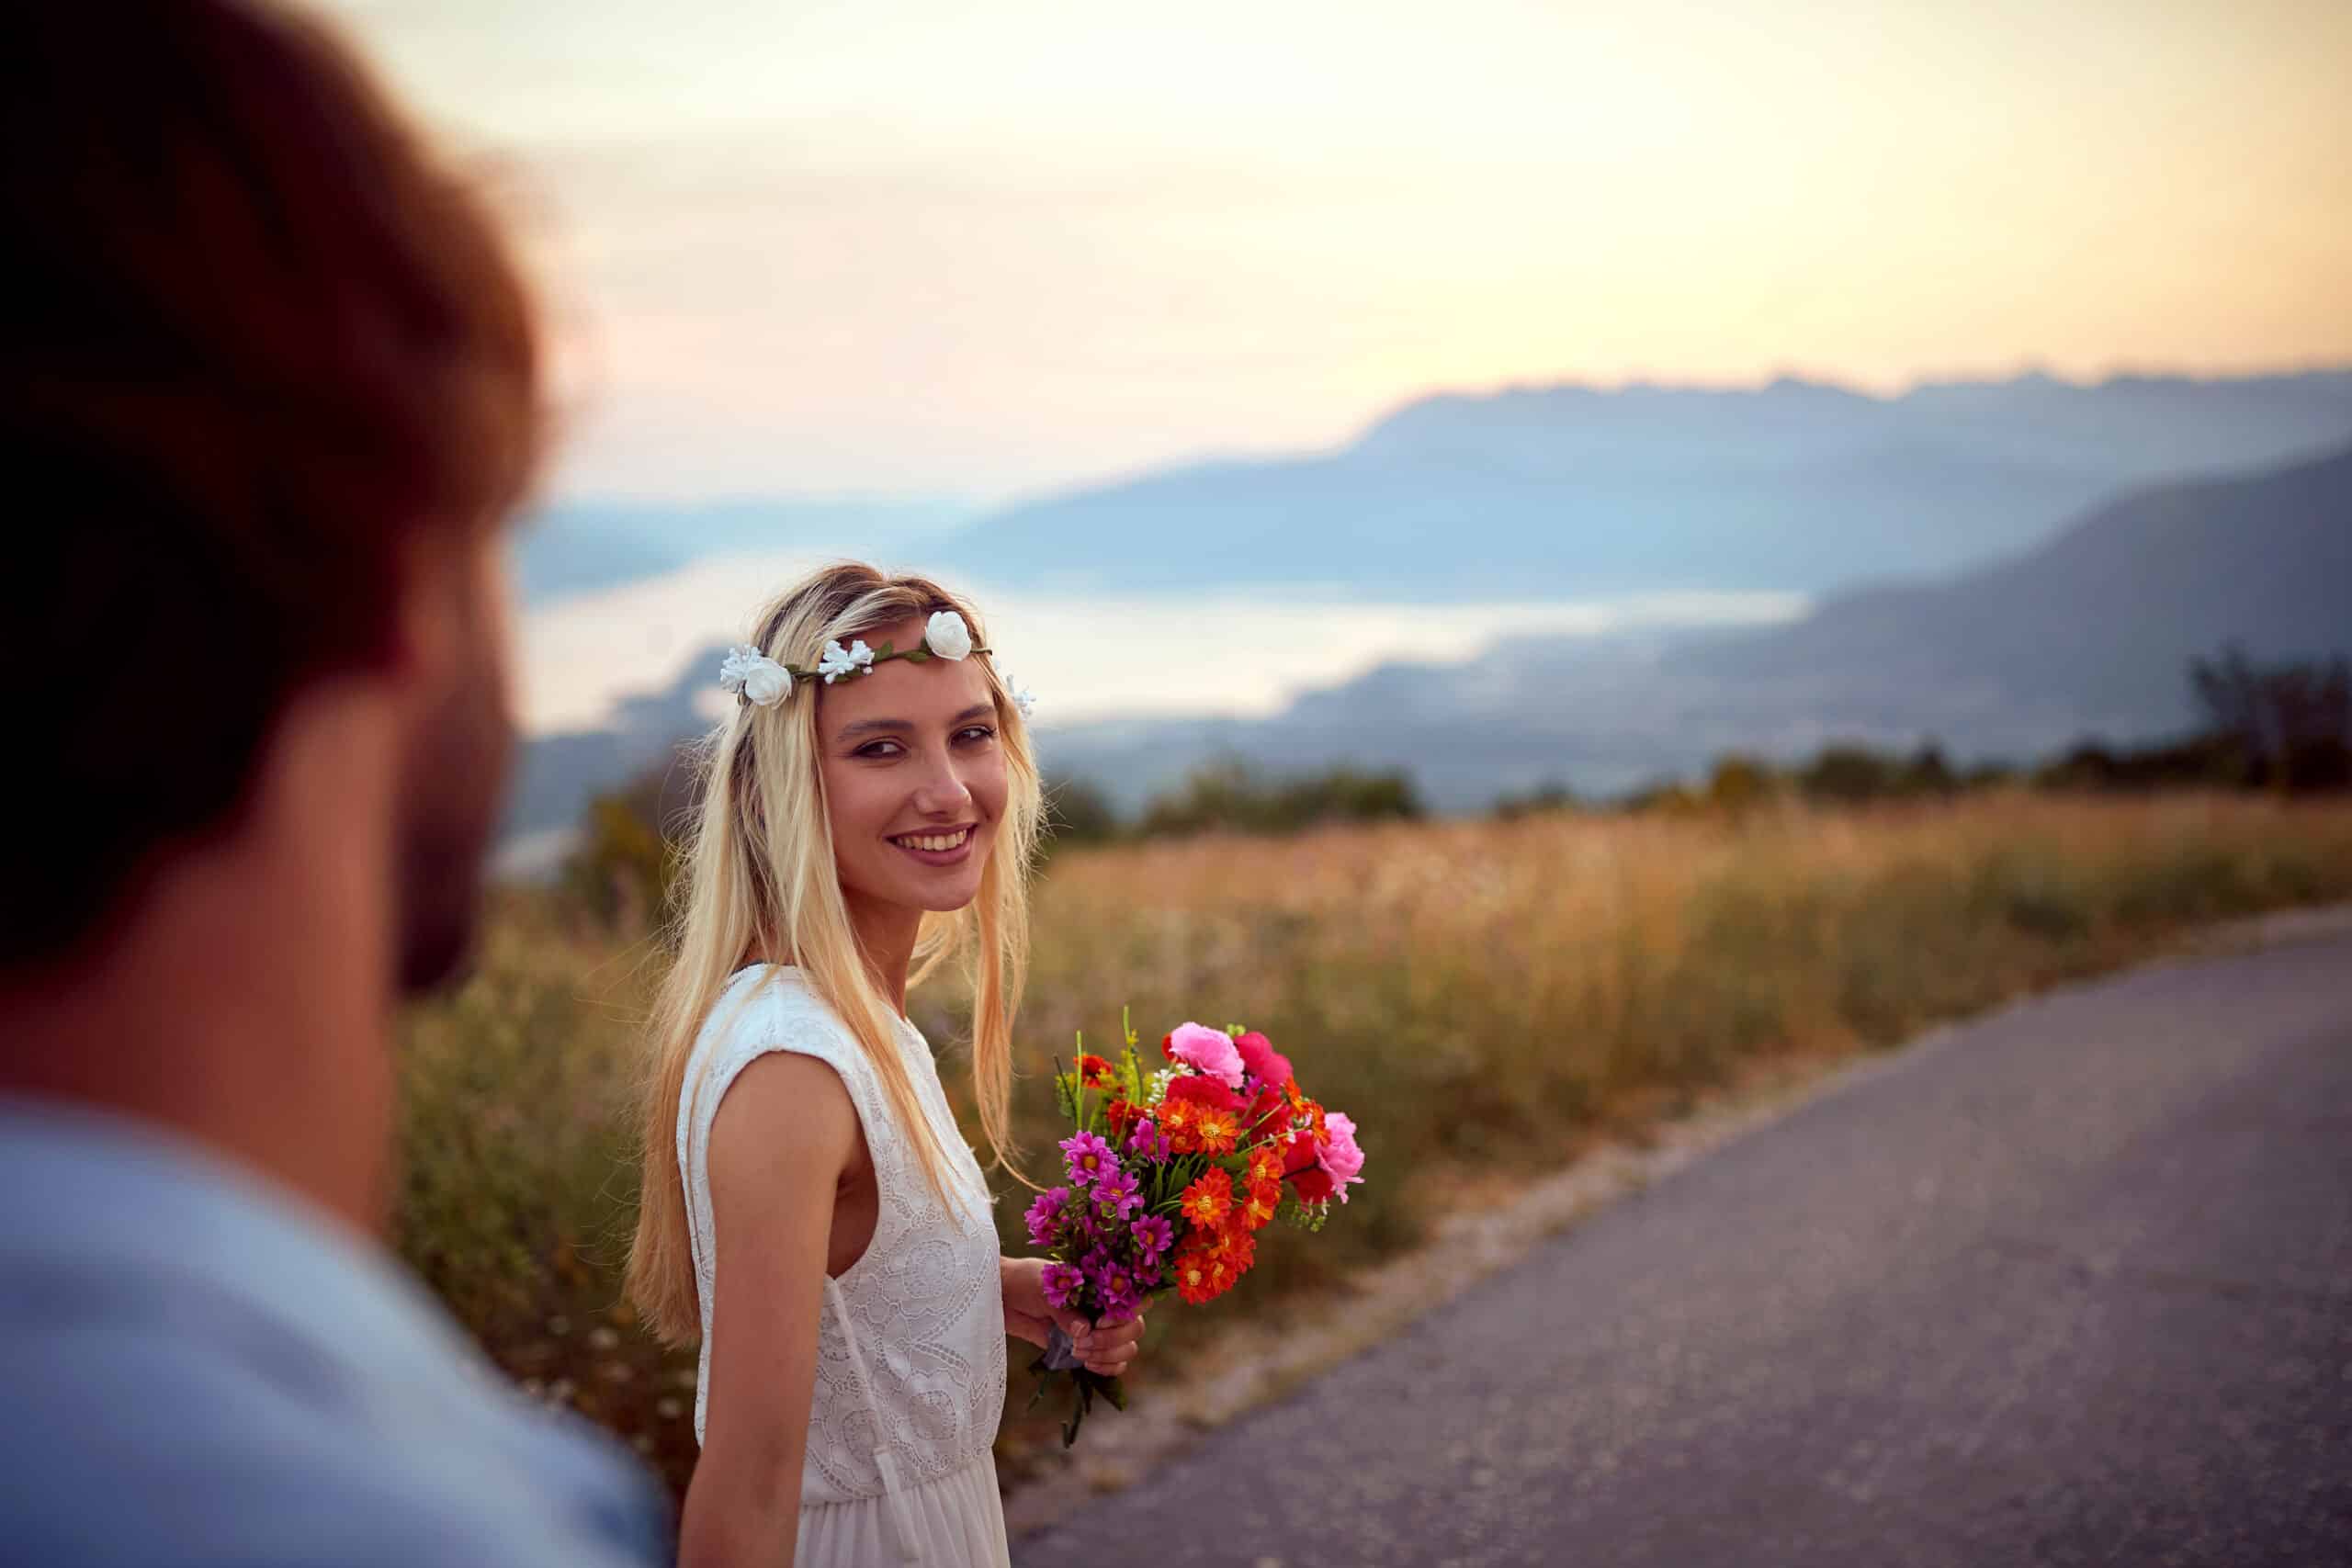 Boho style bride with bridal bouquet leading groom on road outdoor down the mountains.